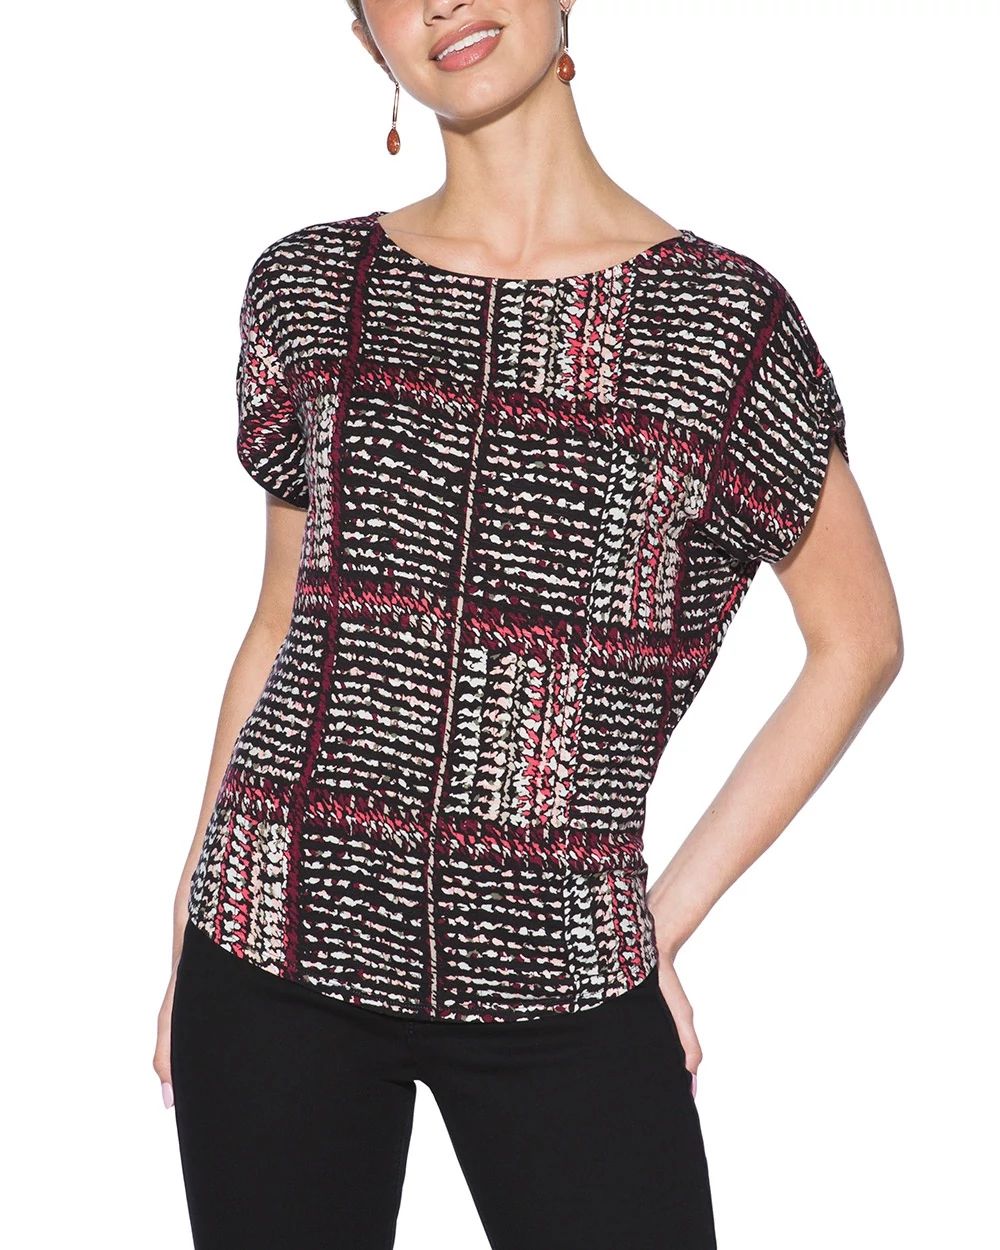 Outlet WHBM Print Detail-Sleeve Tee